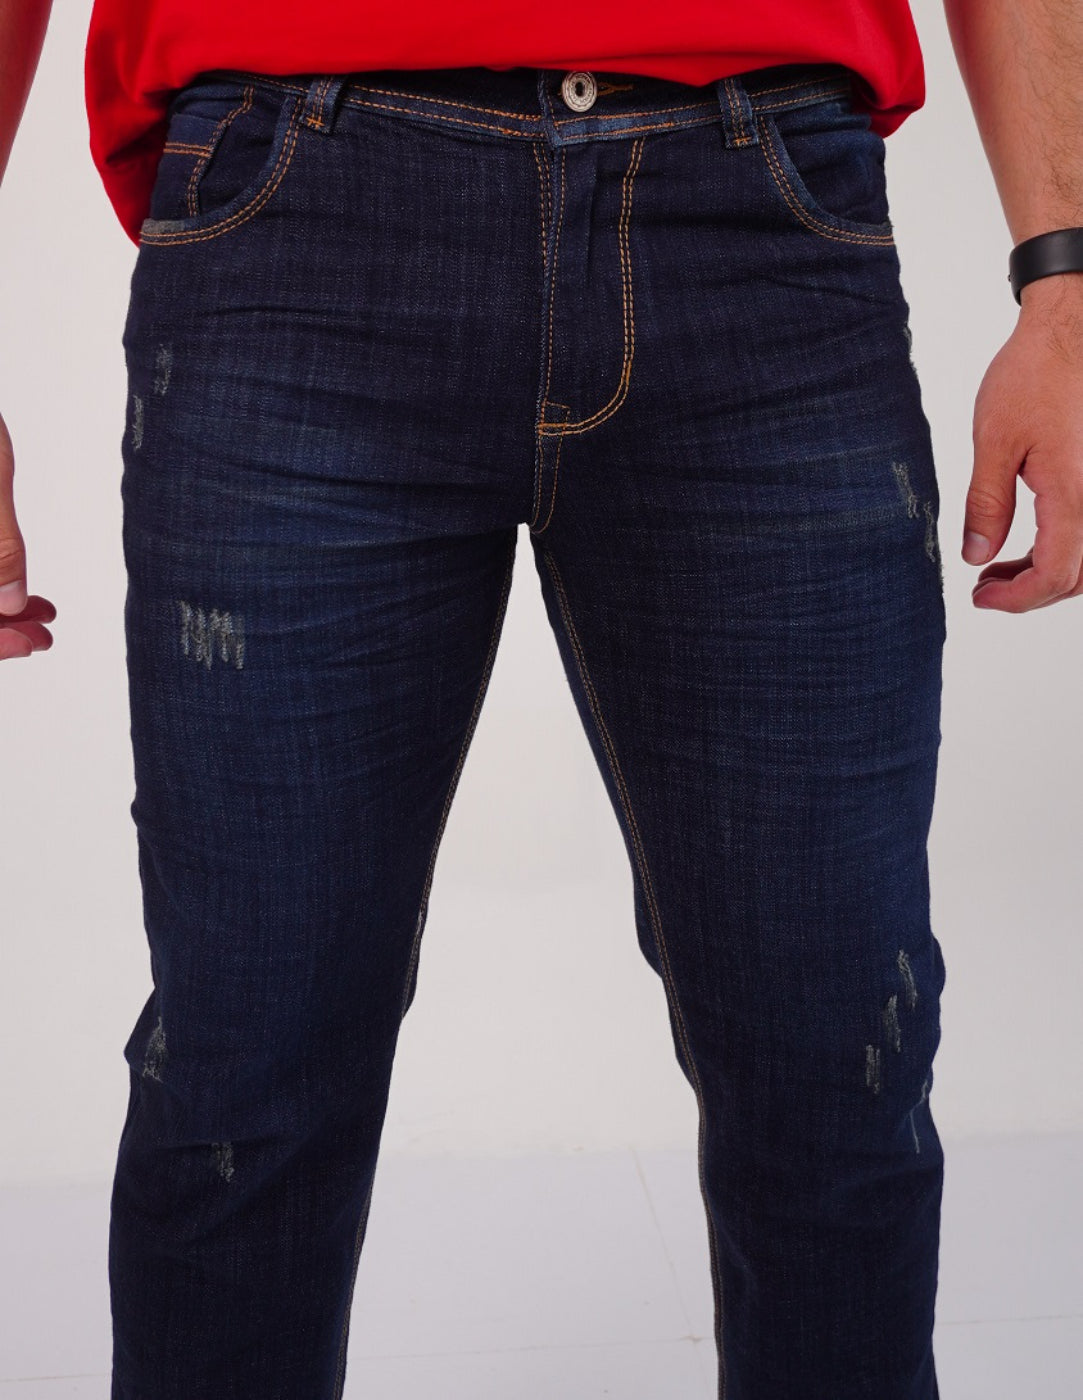 Jeans Colombiano Hombre 4719